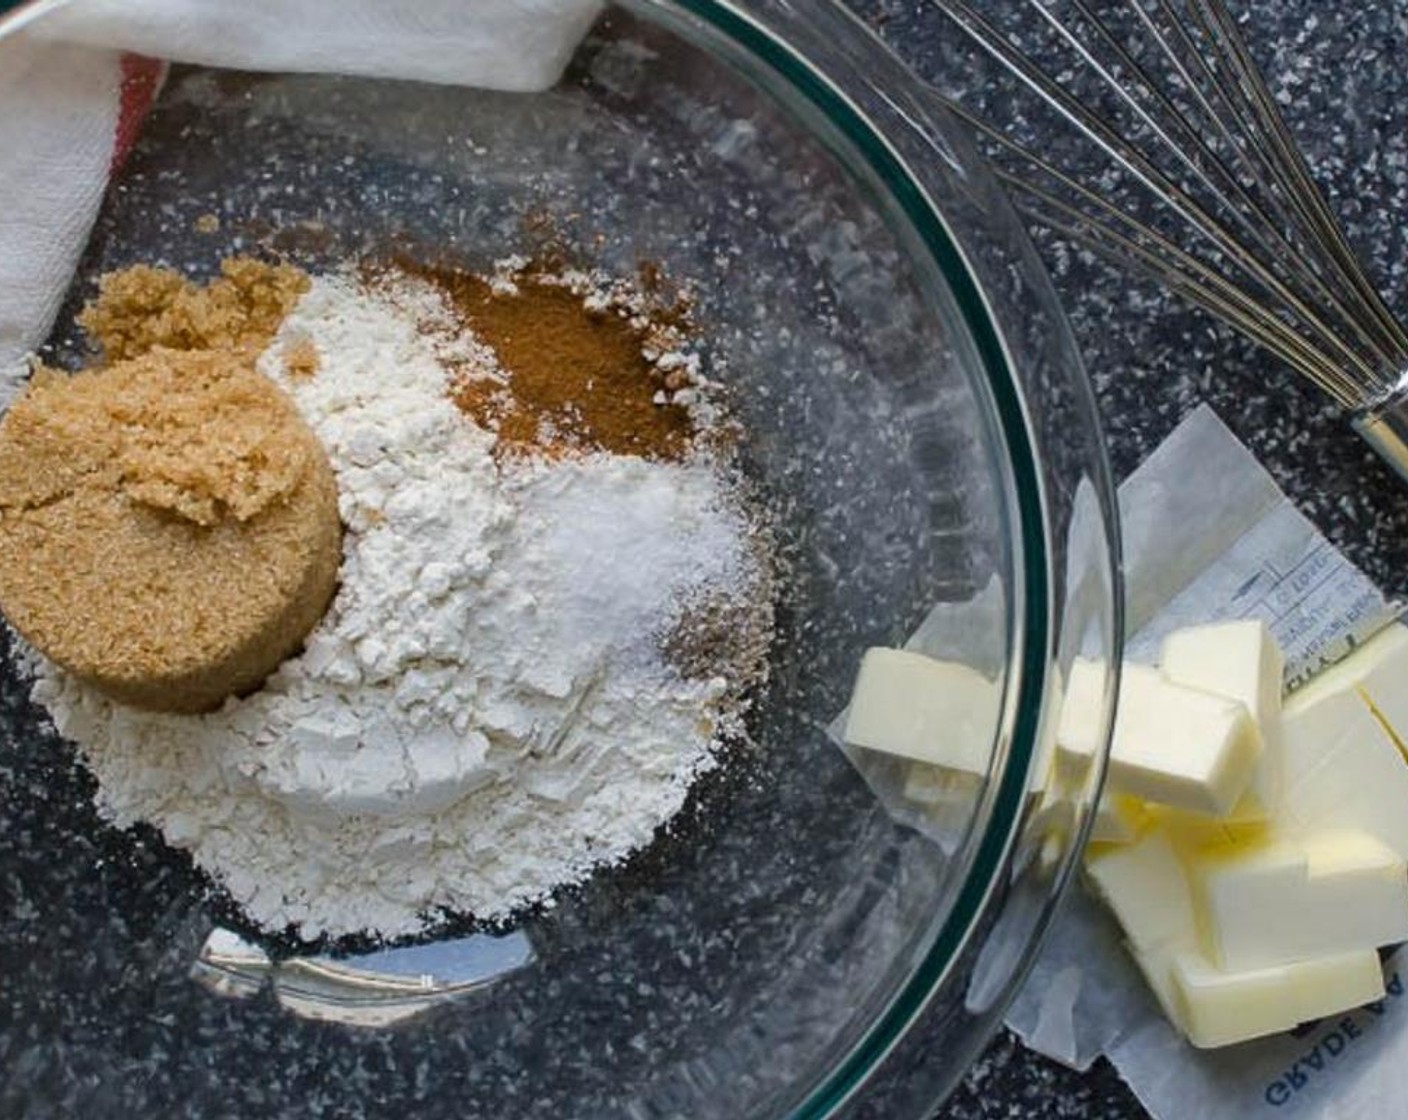 step 2 In a medium bowl combine the All-Purpose Flour (1/2 cup), Brown Sugar (1/4 cup), Ground Cinnamon (1/2 tsp), Ground Cardamom (1/4 tsp), Baking Powder (3/4 tsp), Unsalted Butter (1/4 cup), and Kosher Salt (1/4 tsp). Whisk to combine.